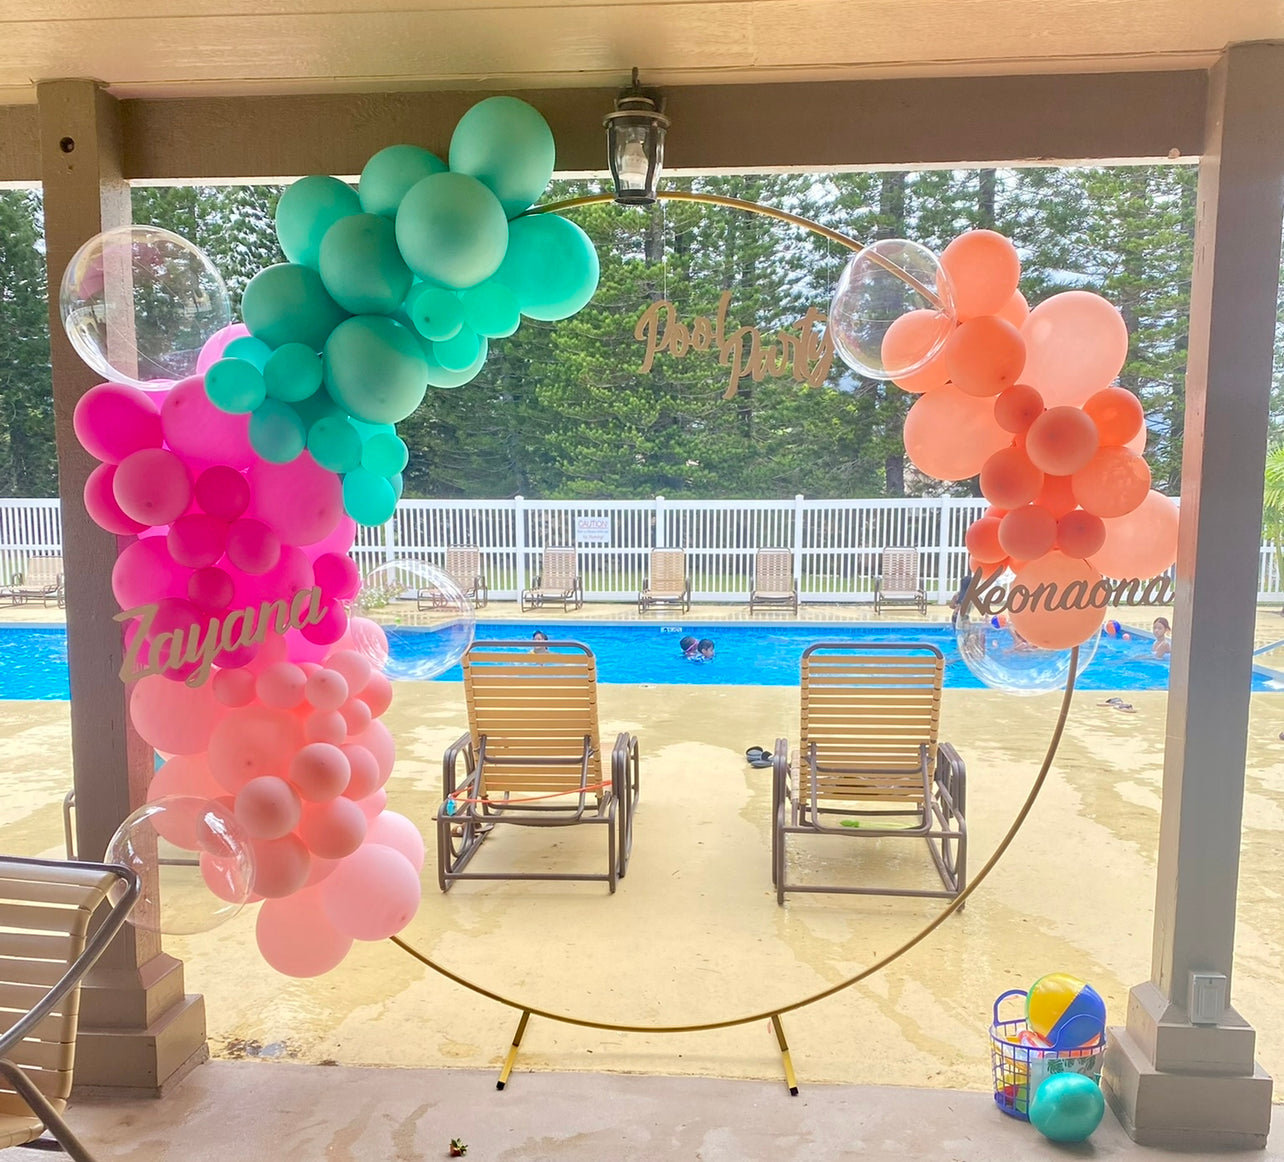 Round balloon arch stand is adorned with clusters of pool party themed color balloons. Wooden name cut outs hang from and propped onto the arch